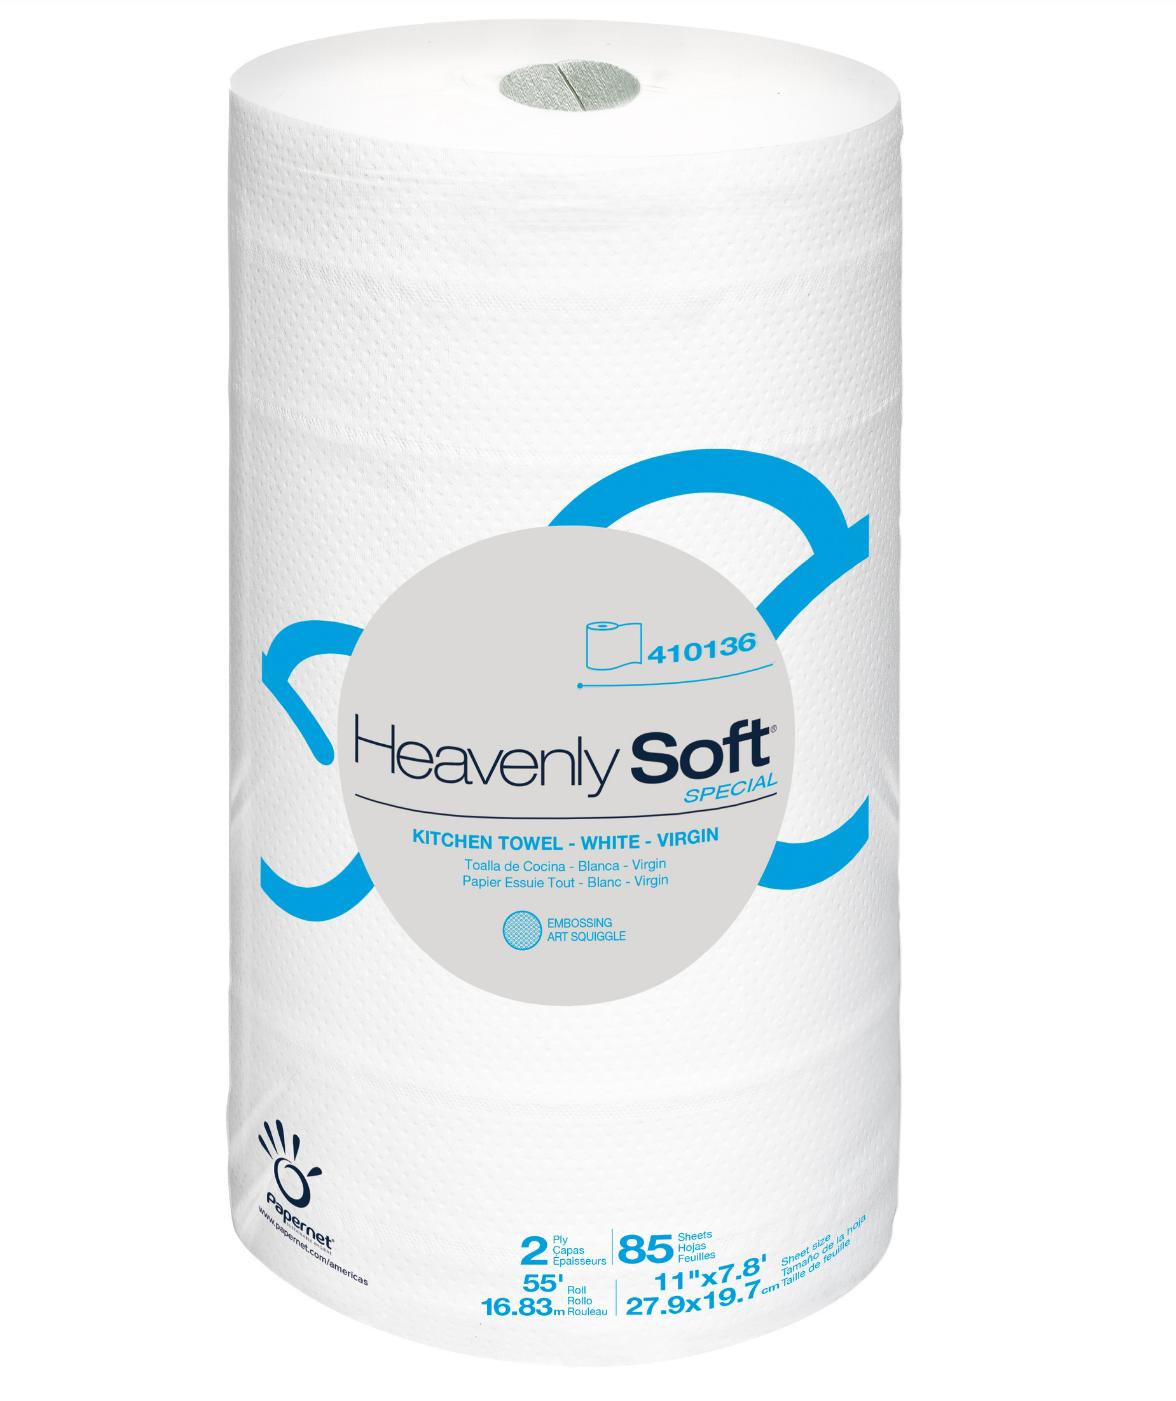 Heavenly Soft® Kitchen Towel - 11 X 9, 2 Ply, 210 sheets (Case of